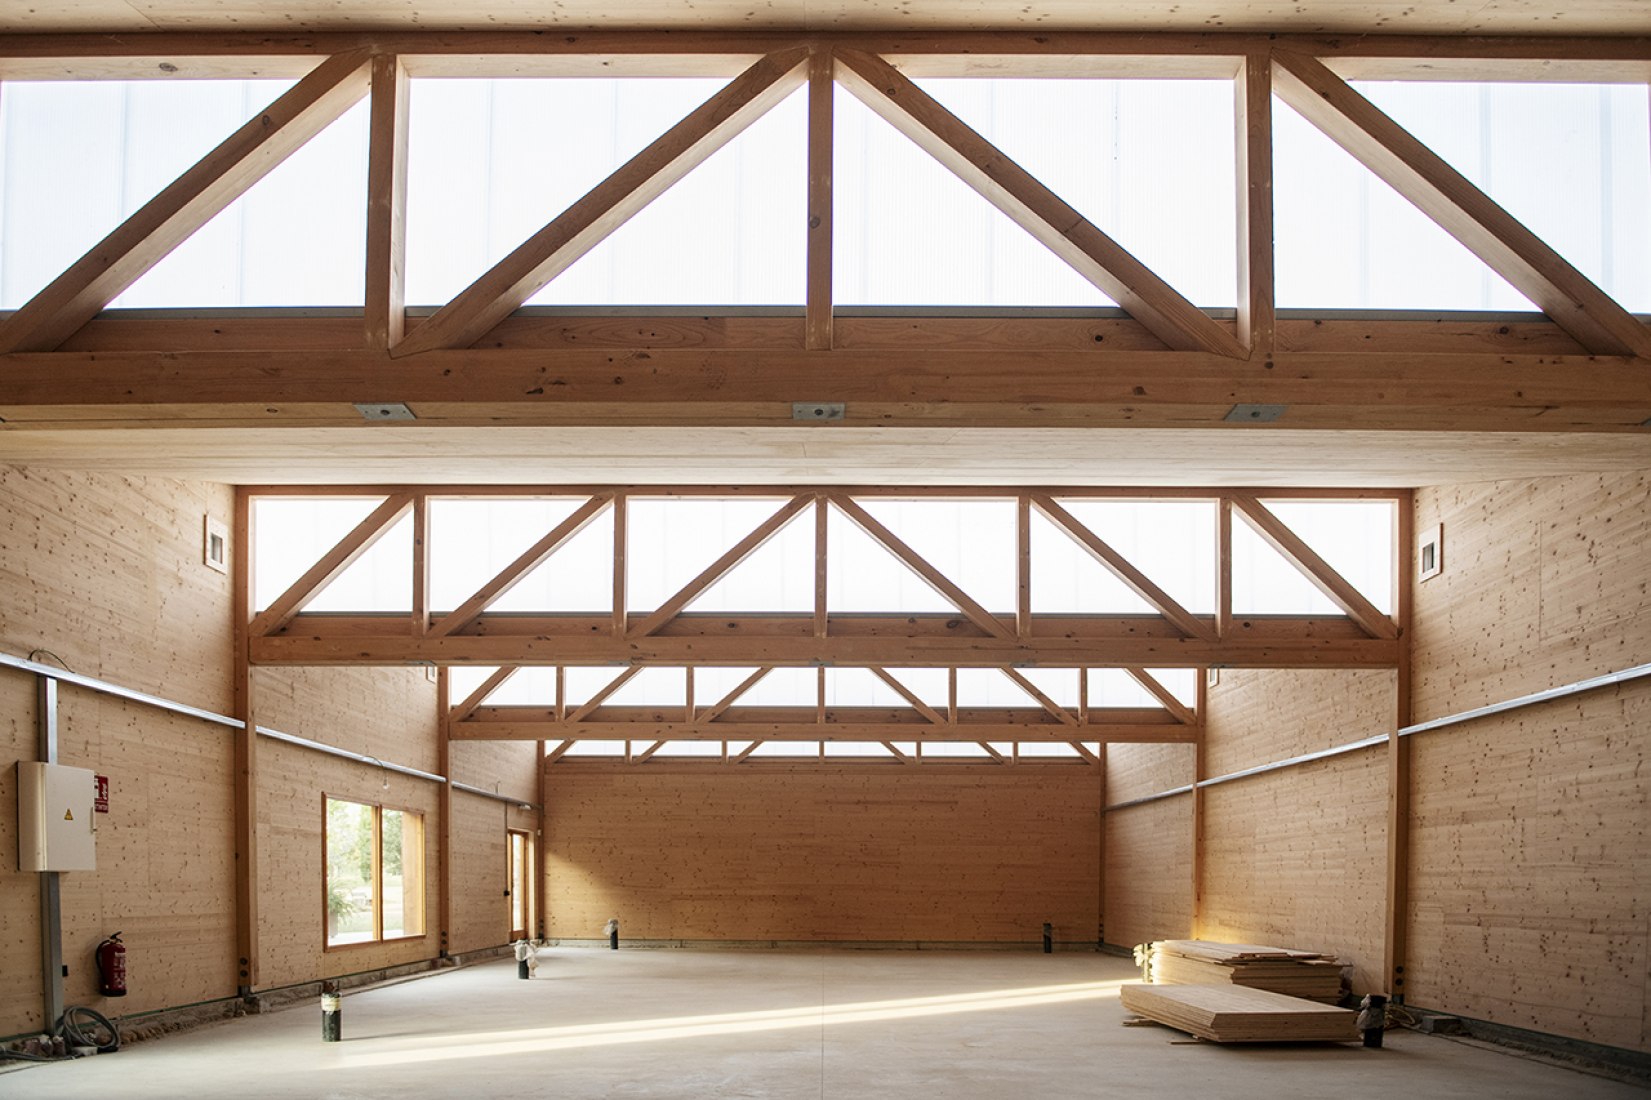 Franqueses del Vallés Nature Classroom by Edra Arquitectura Km0 and Bunyesc arquitectes. Photograph by Stella Rotger.